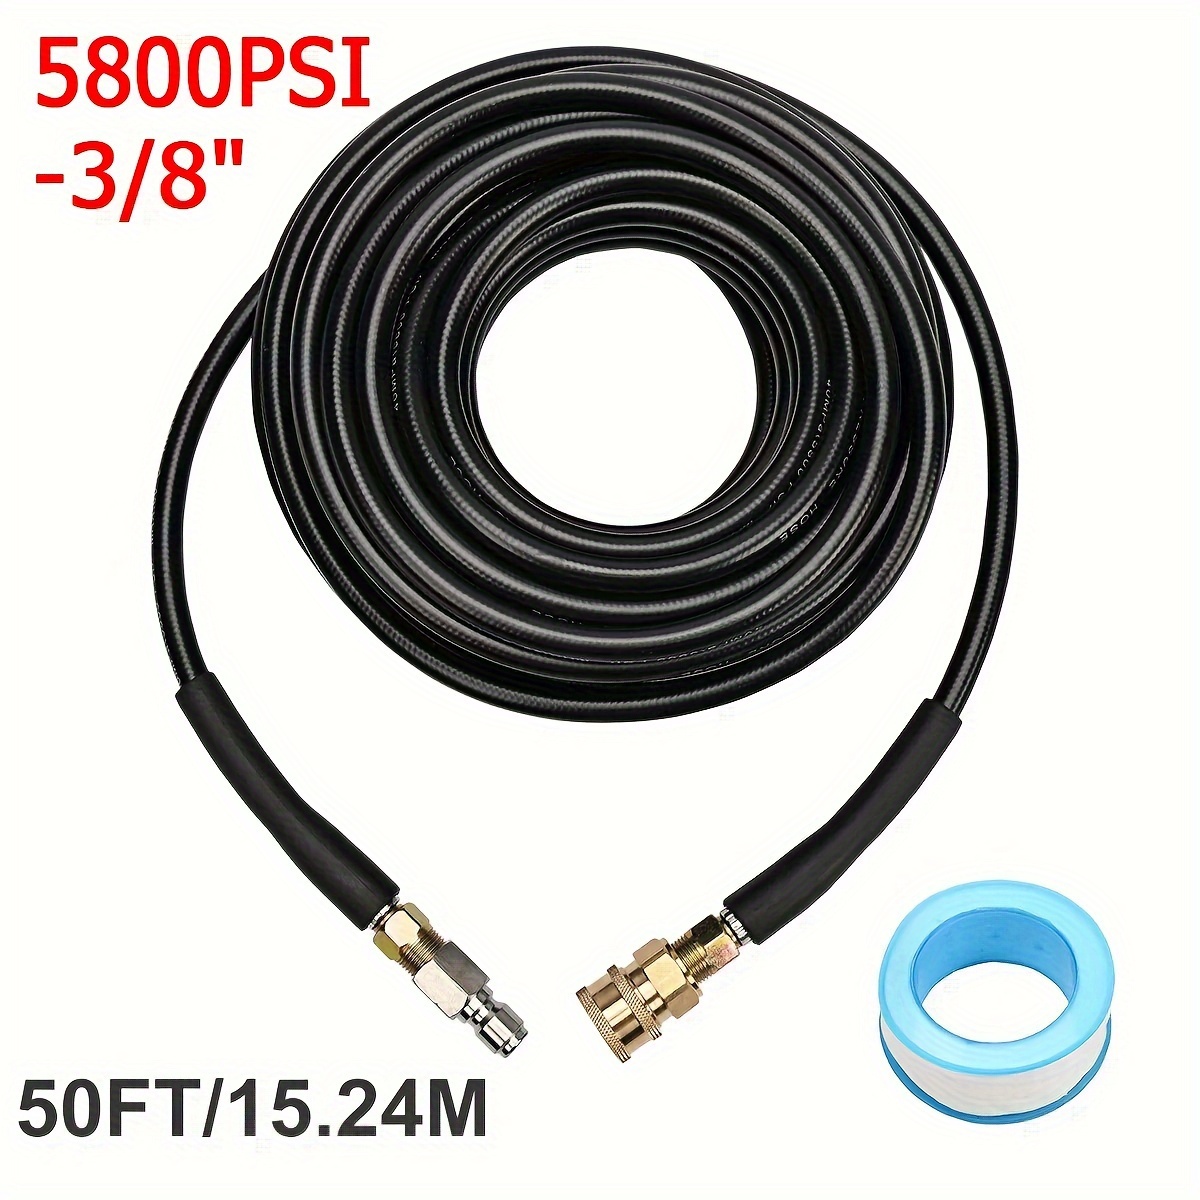 

50ft 15m 5800psi Replacement High Pressure Power Washer Hose -3/8" Quick Connect